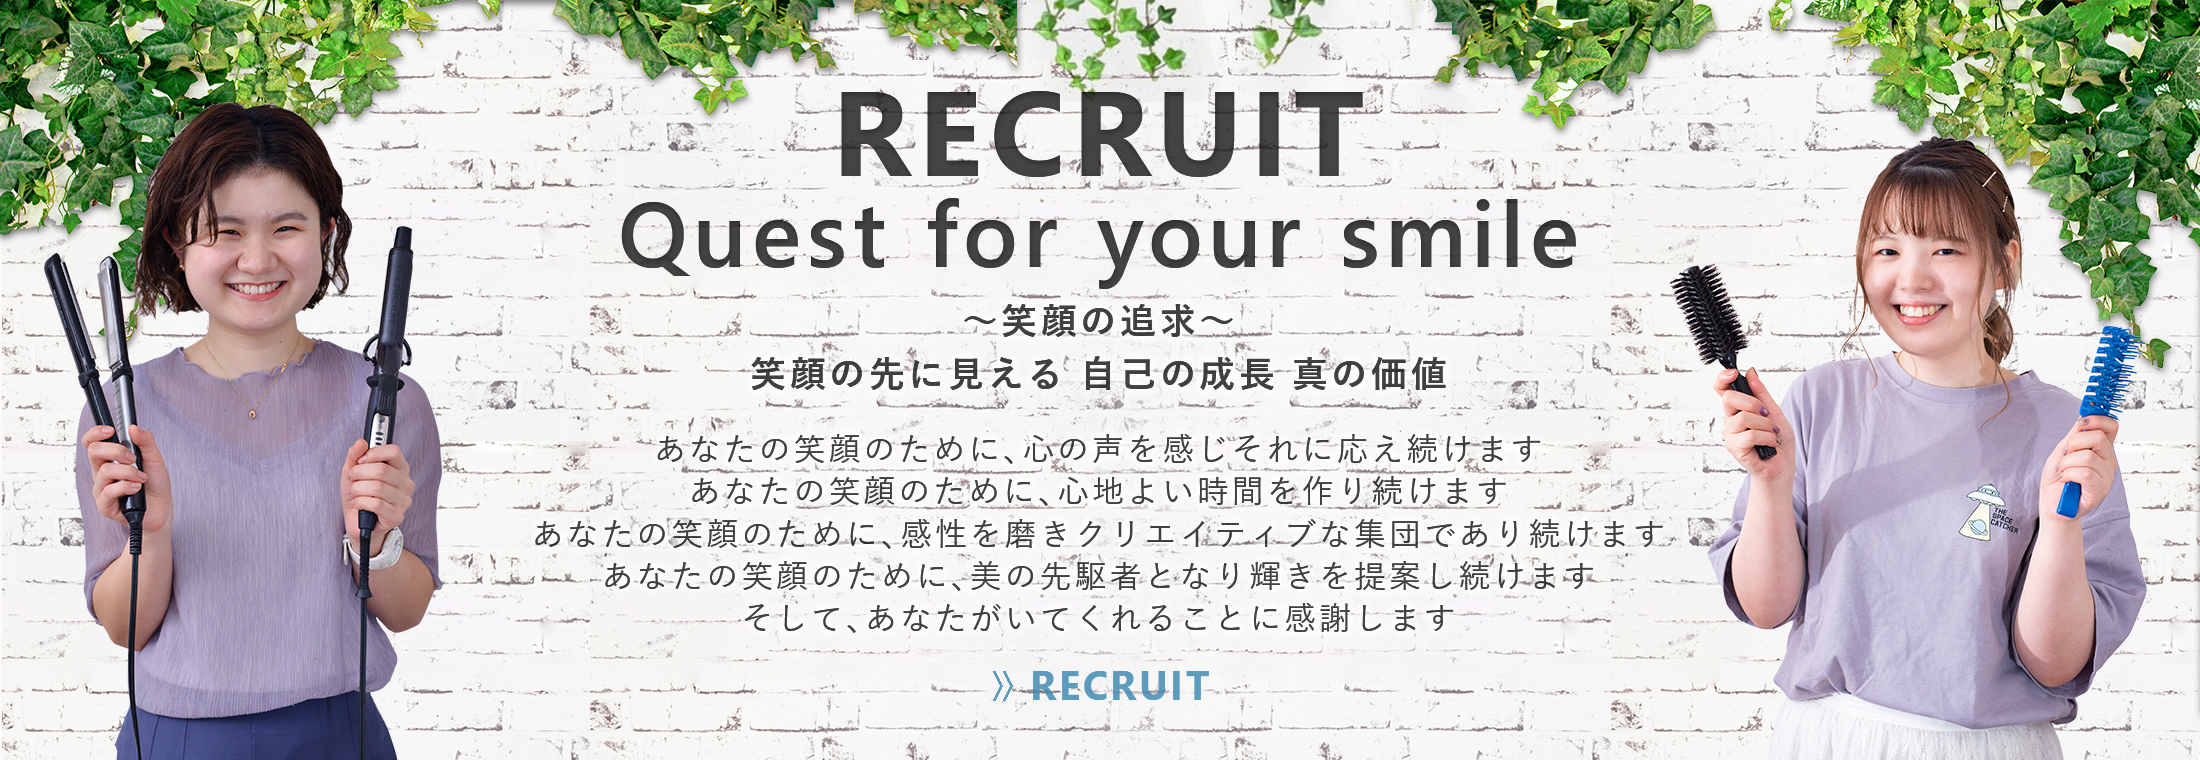 Quest for your smile